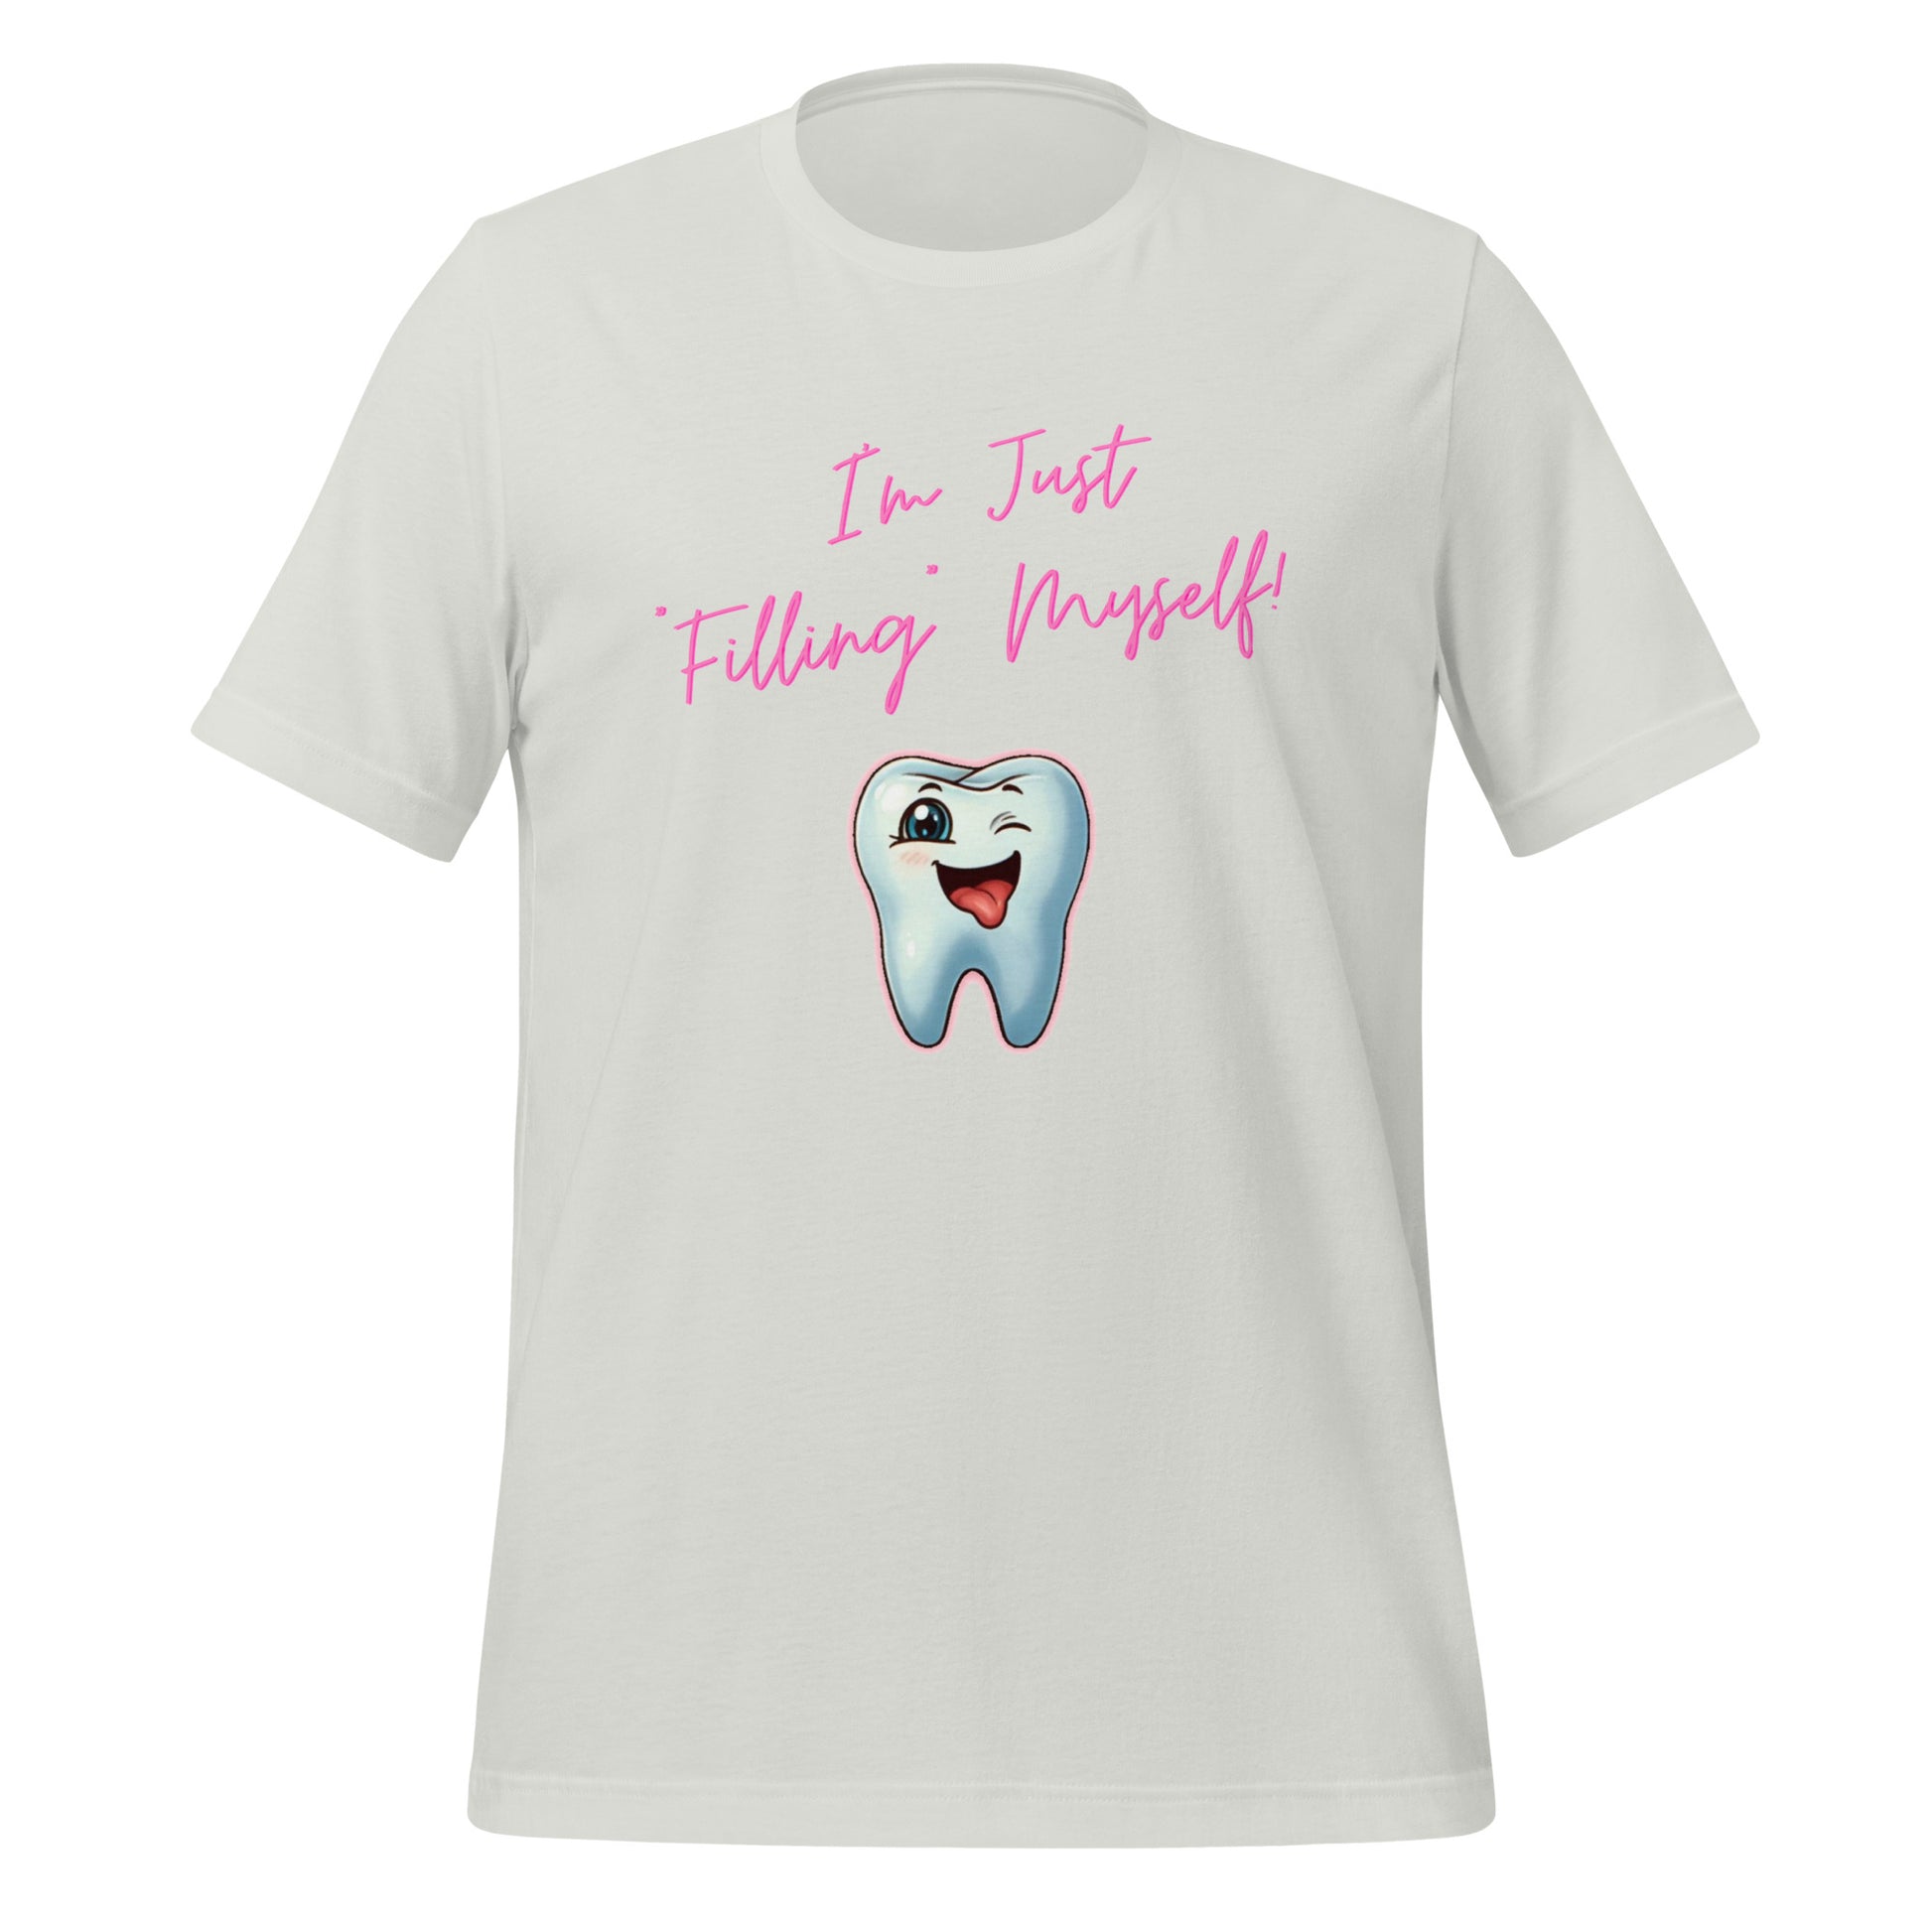 Flirtatious winking cartoon tooth character with the phrase "I'm just filling myself!" Ideal for a funny dental t-shirt or a cute dental assistant shirt. Silver color. 